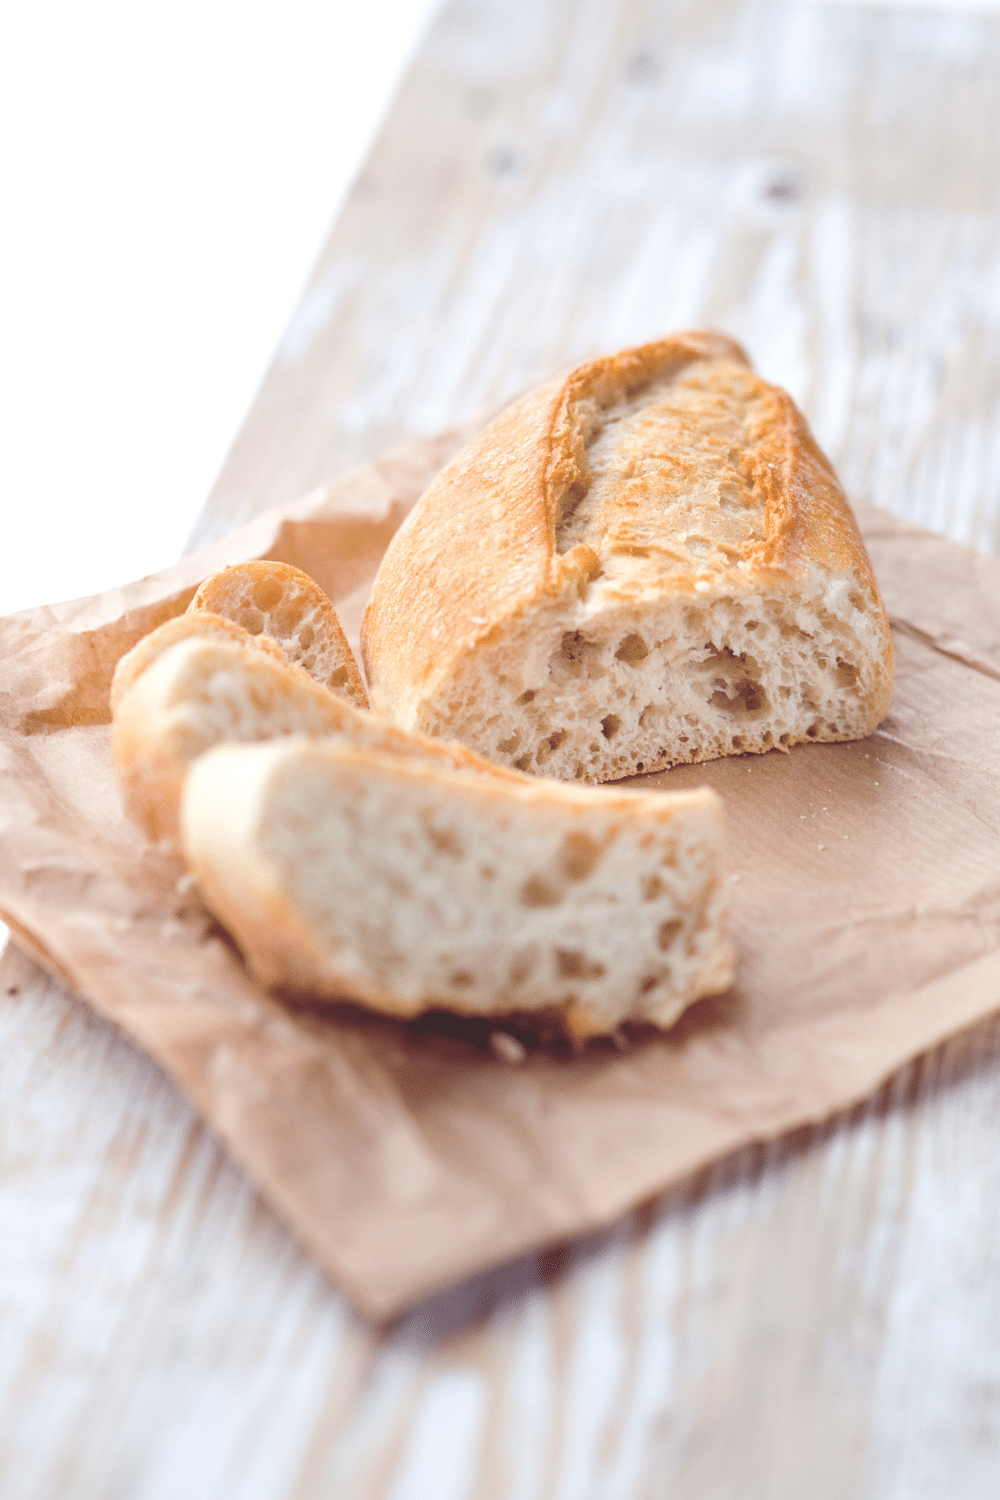 The Top 5 Best Gluten Free Breads for 2023